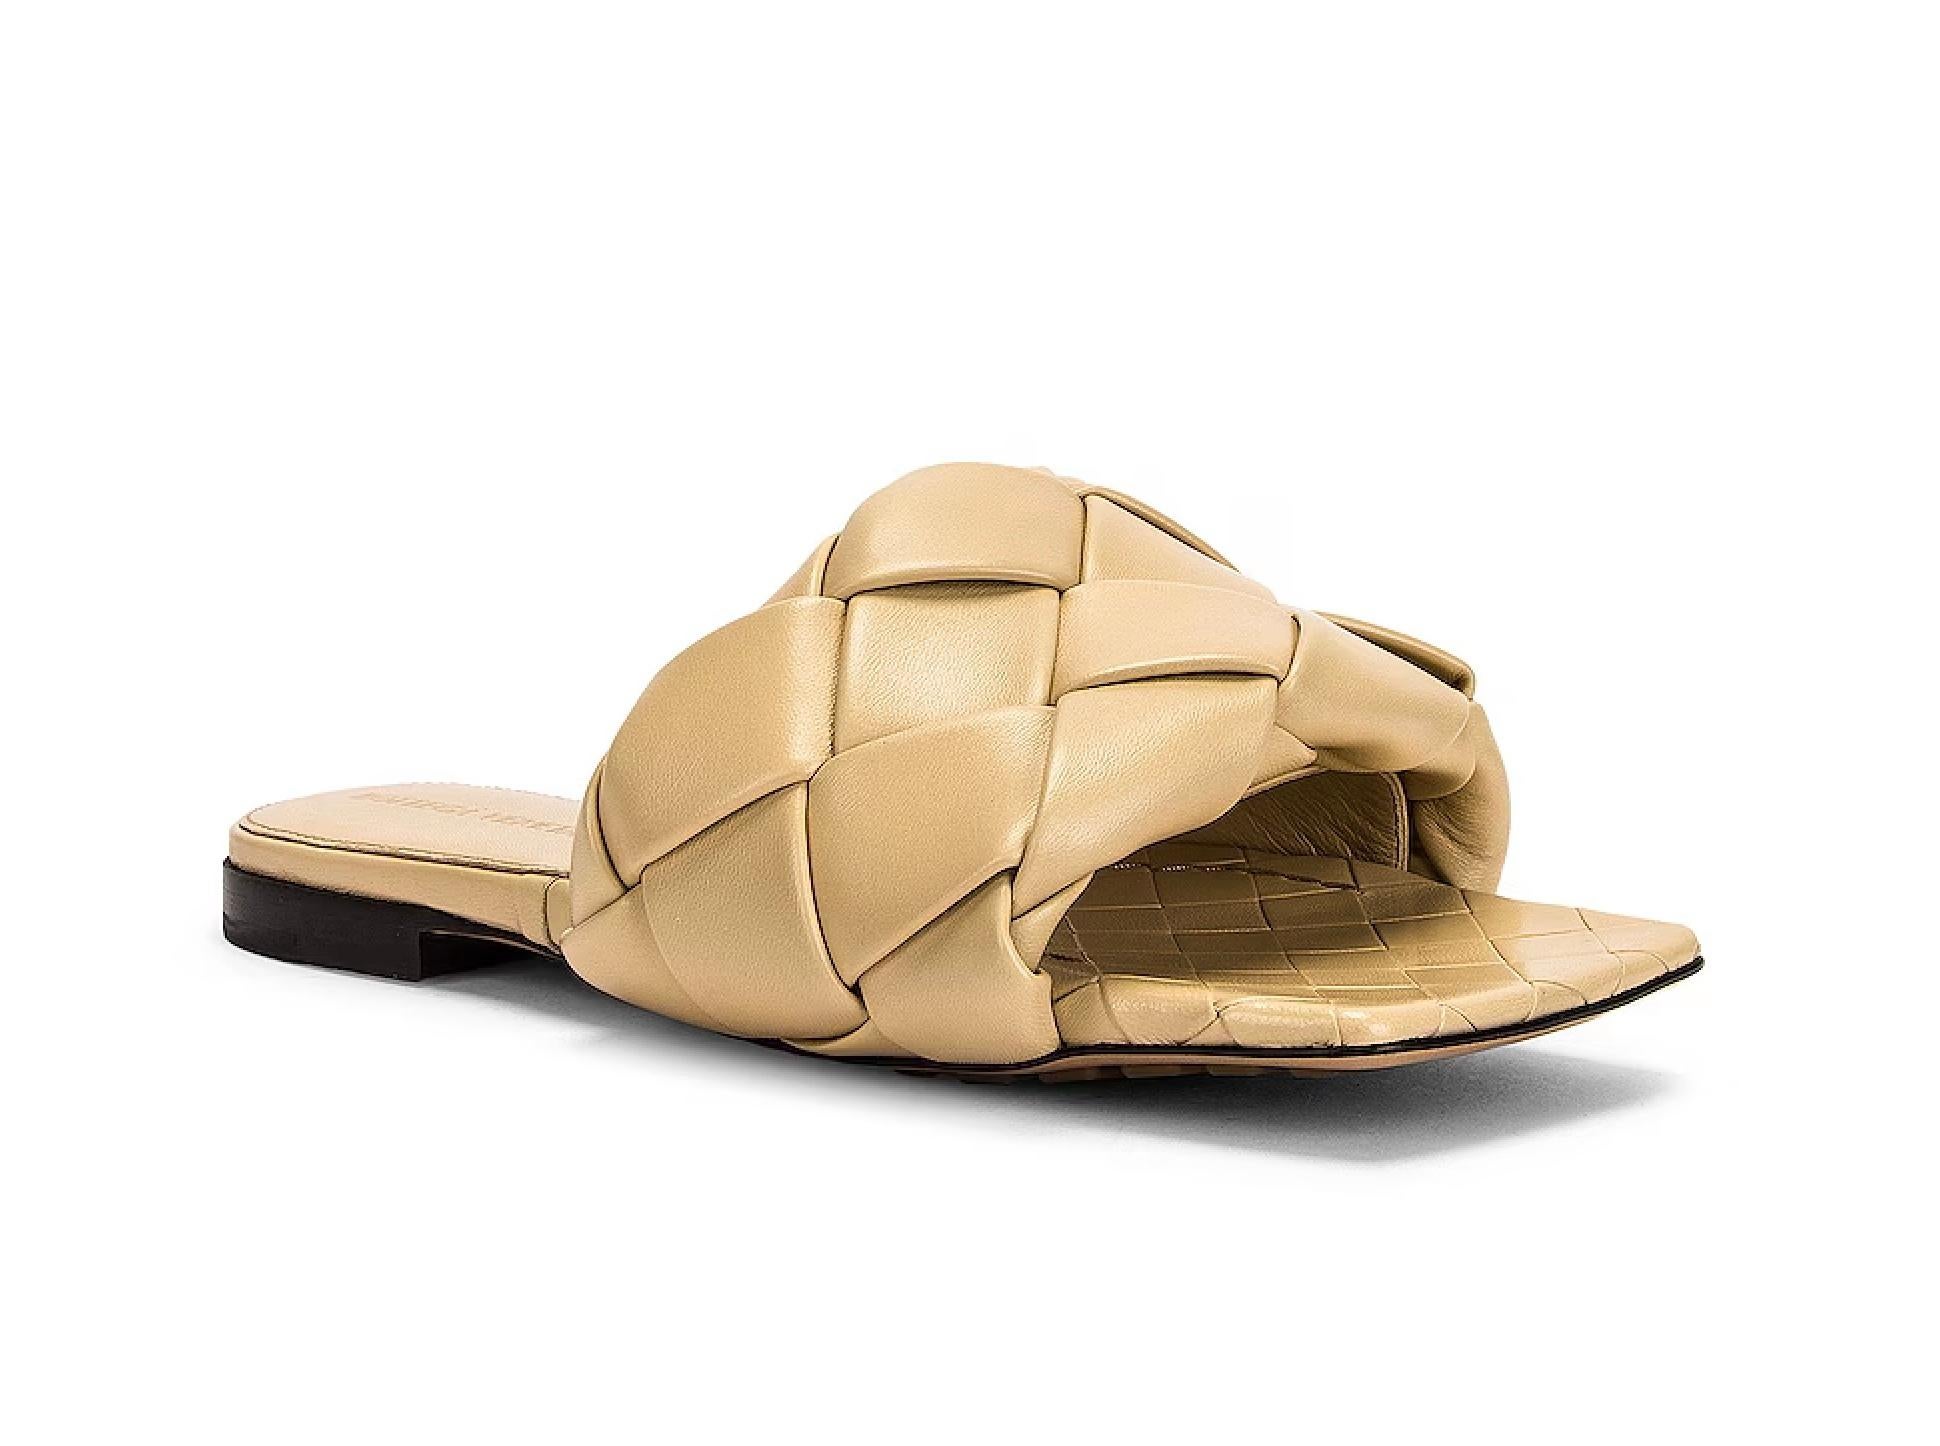 Bottega Veneta's inventive, sophisticated spirit is reflected in the design of these flat BV Lido sandals. A creation that features the brand's famous braided pattern. 
Brand new, never worn, comes with all of original packaging.